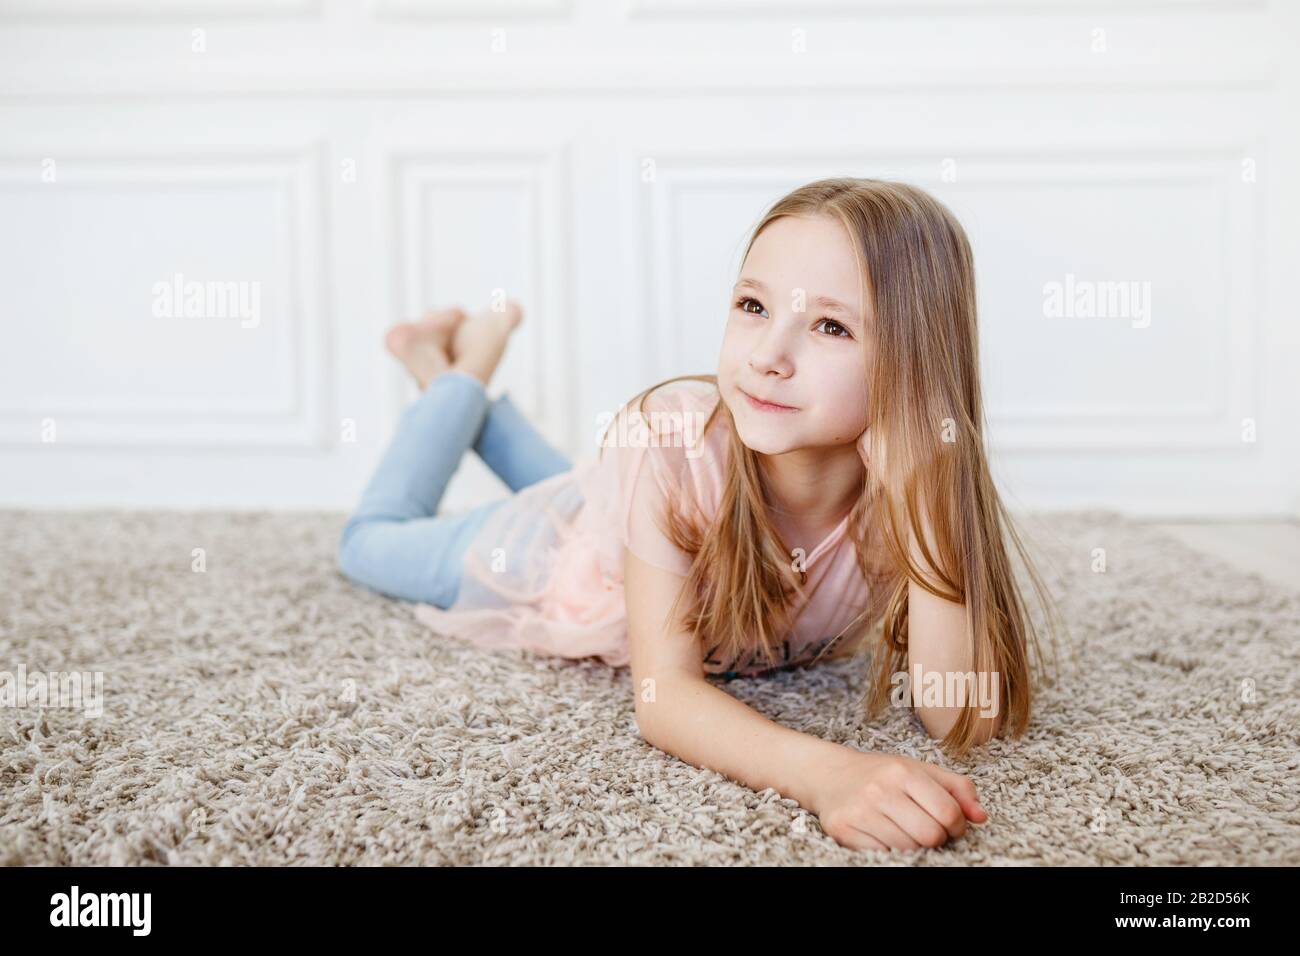 Cute pre-teen girl wearing fashion clothes posing in white interior. little  but very serious girl Stock Photo - Alamy